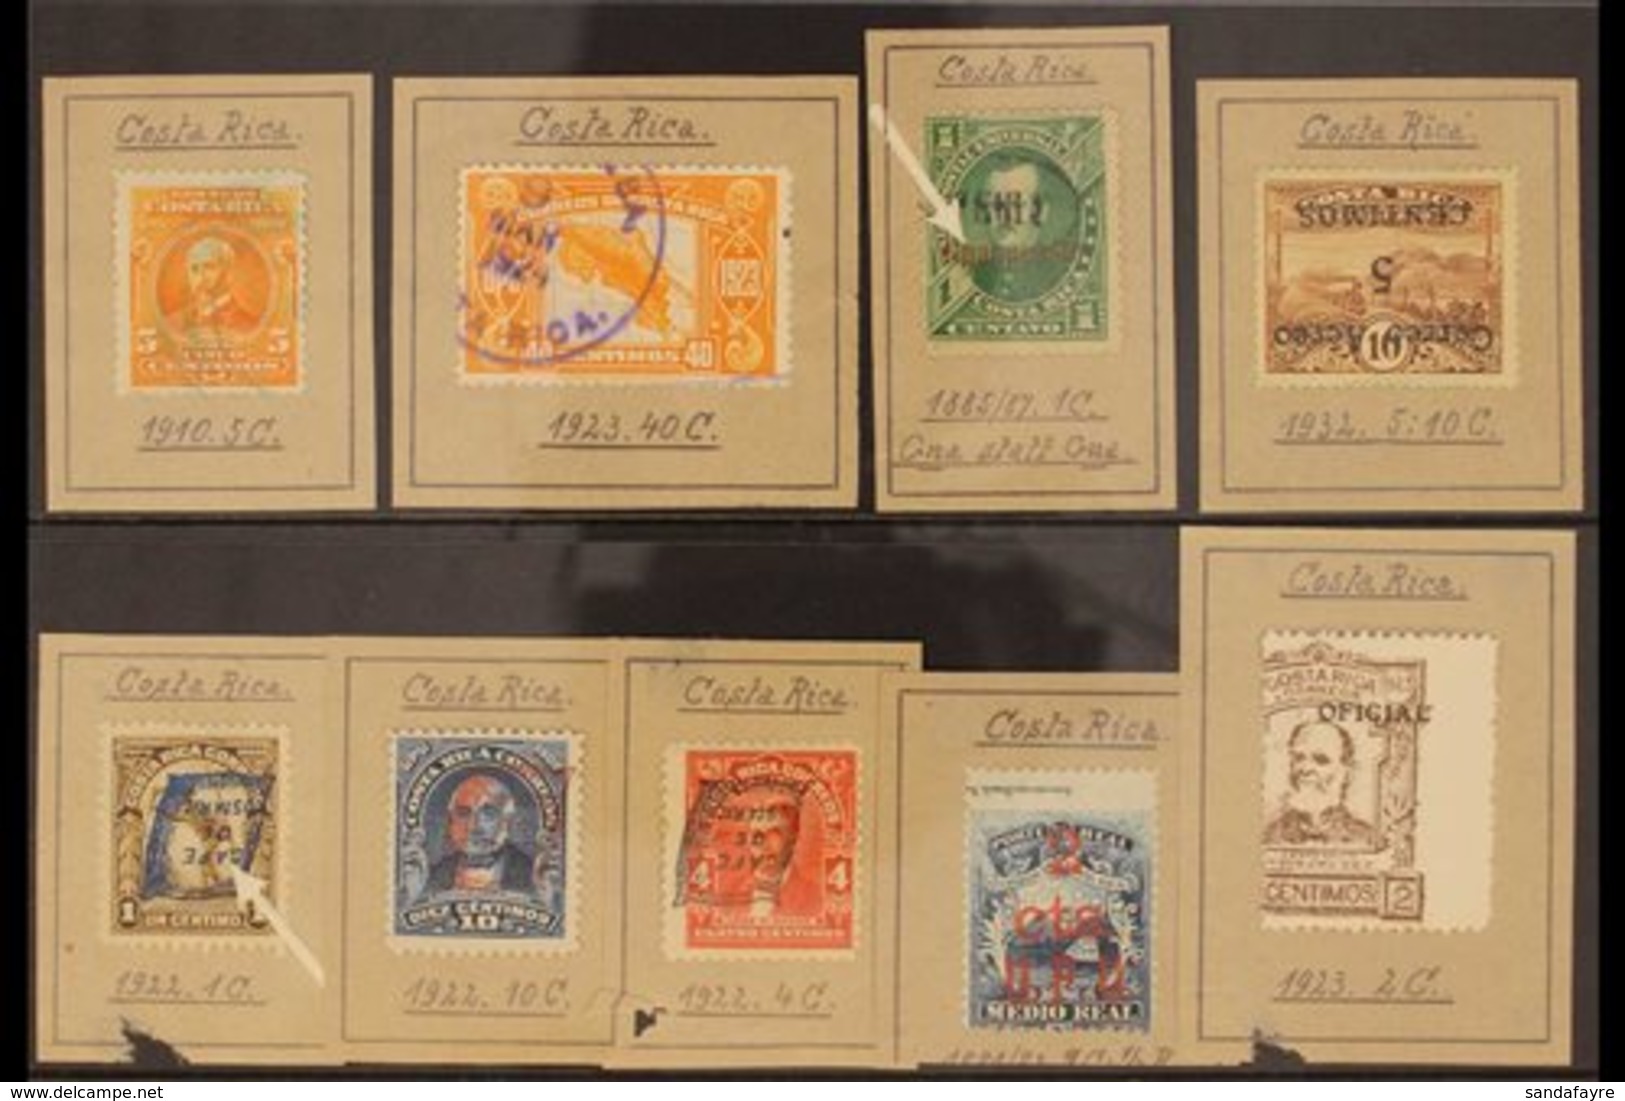 1881-1932 INTERESTING CURIOS. A Small Selection Featuring Errors And Varieties. Includes 1885 Overprinted 1c With "Gnana - Costa Rica